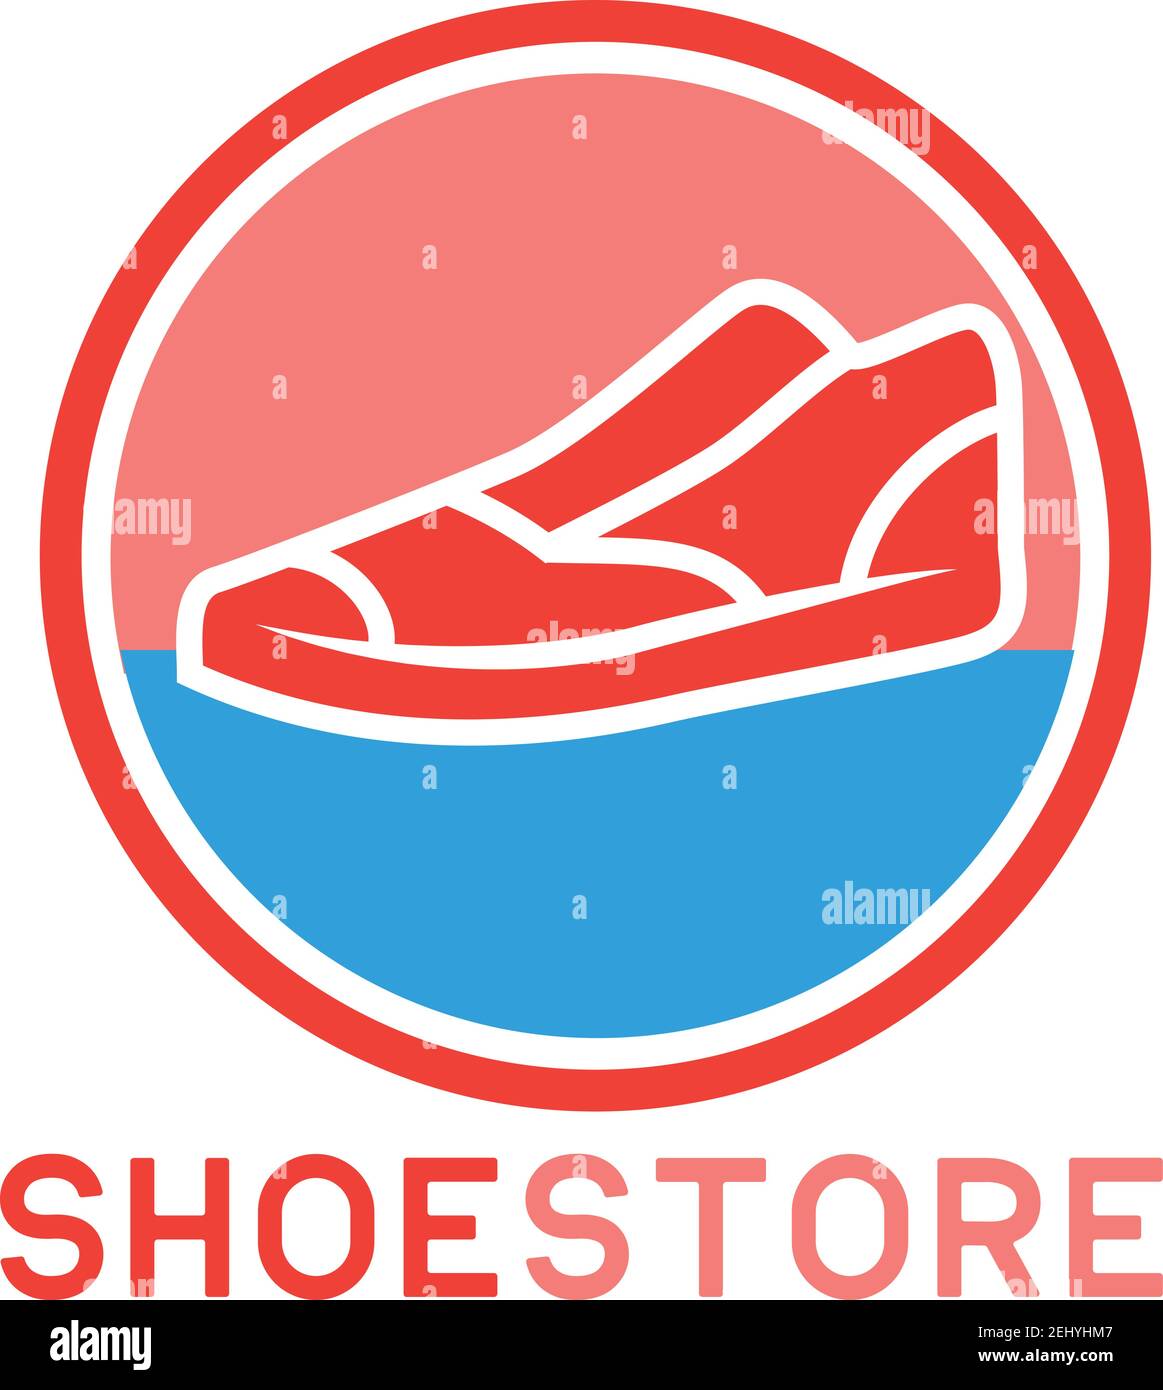 shoes store logo for shoes store on white background. vector ...